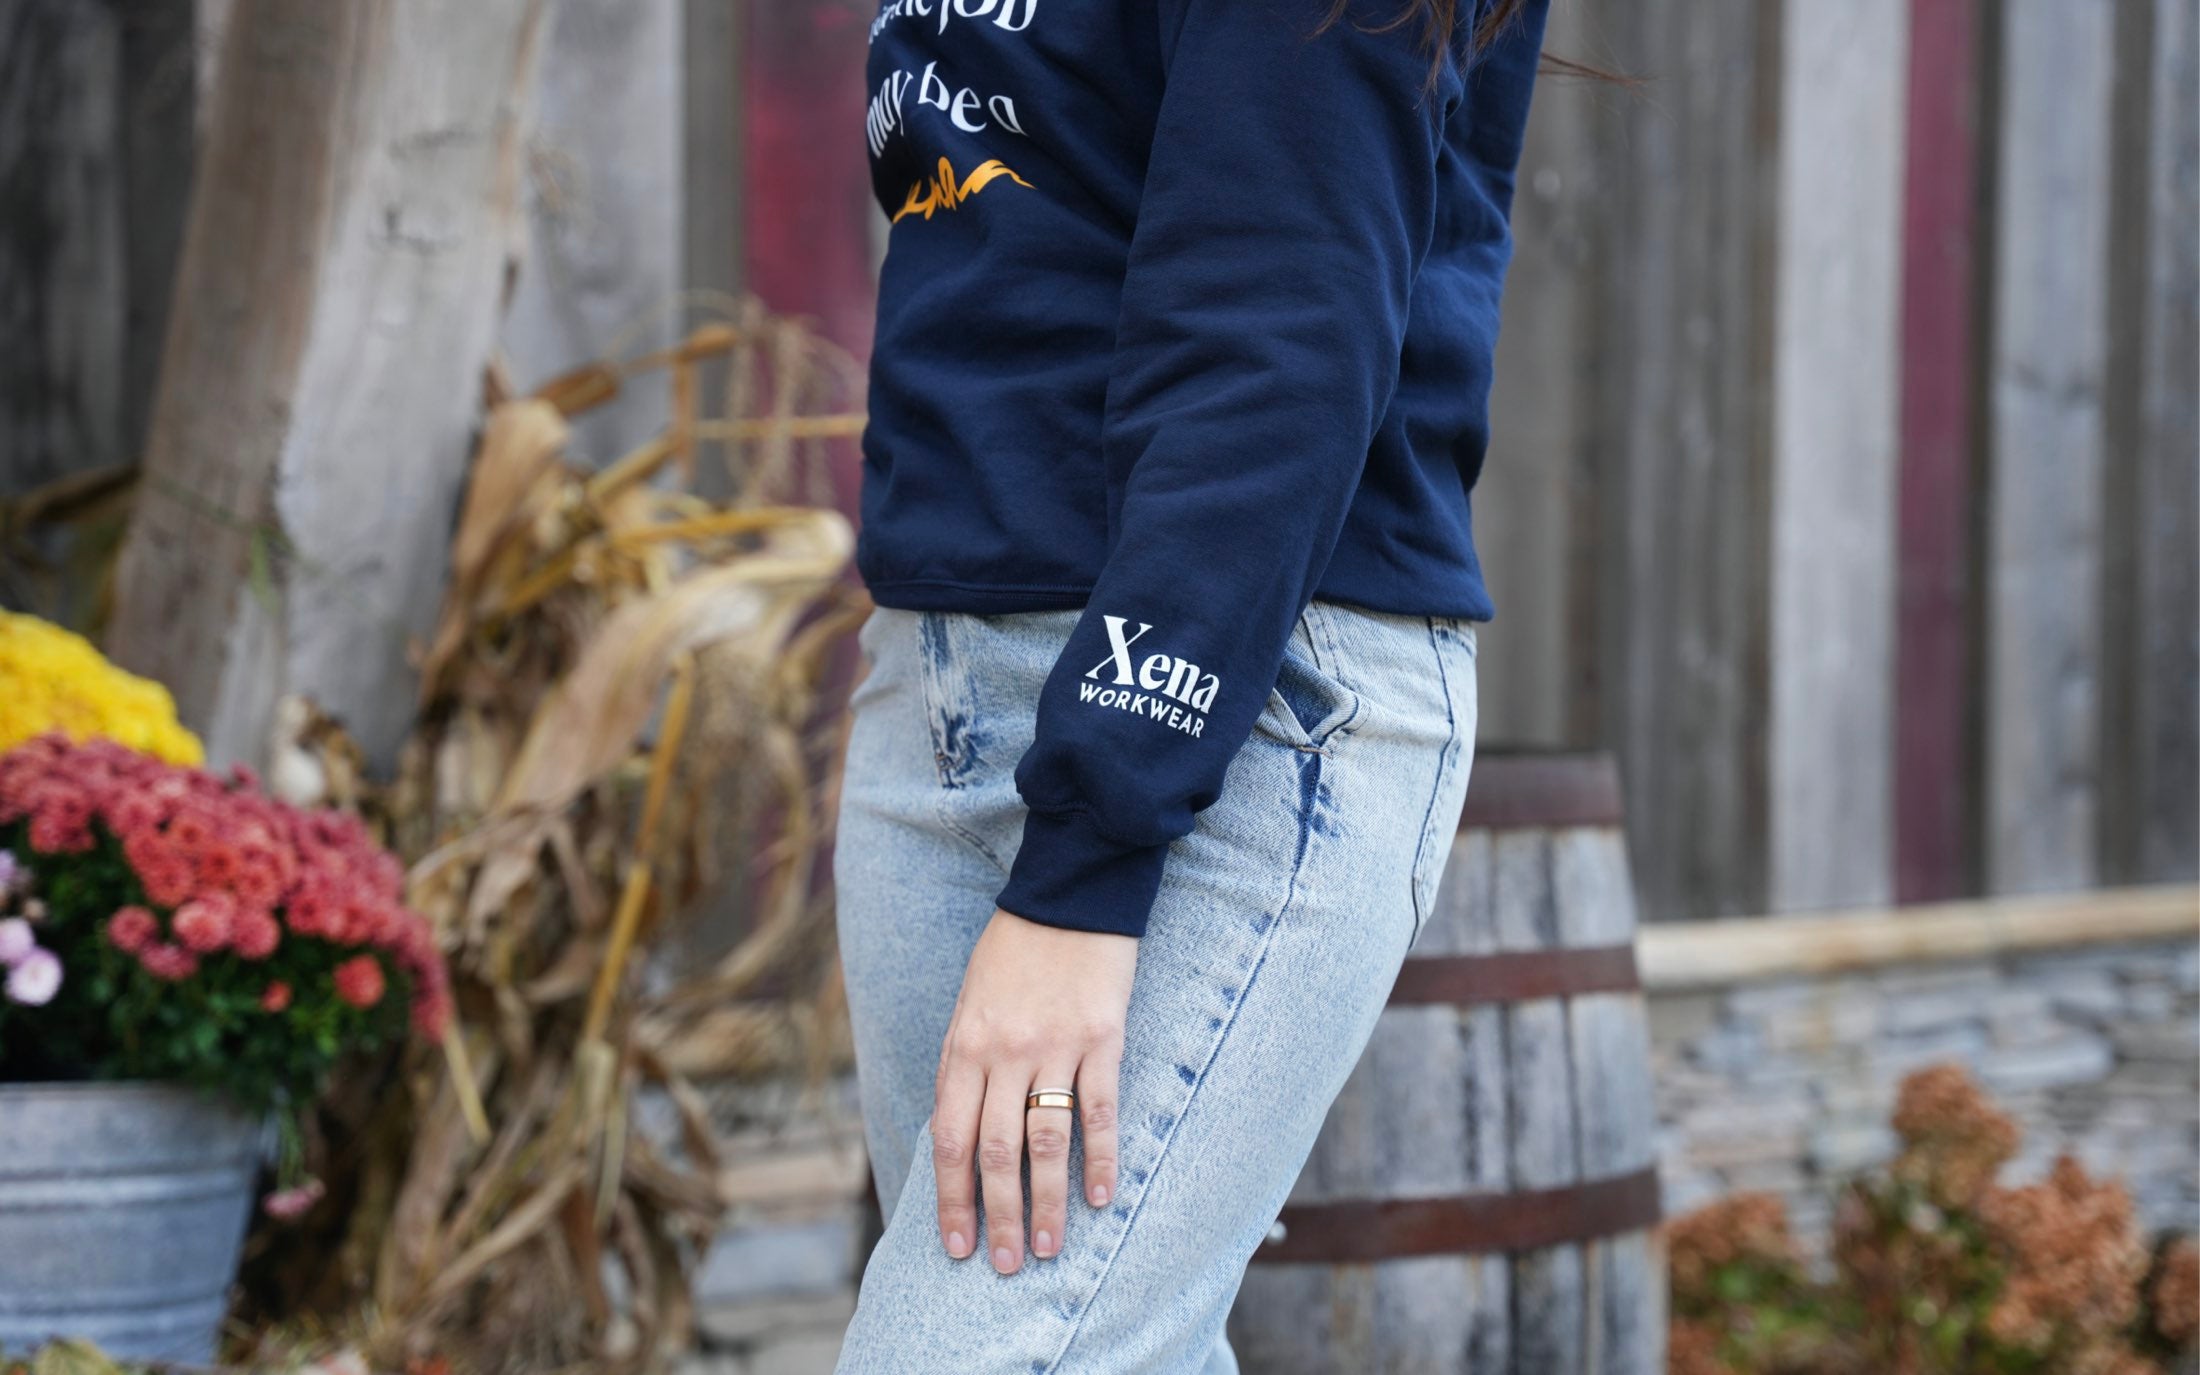 The Right Woman Sweatshirt from Xena Workwear for Women in Night Sky Blue Color